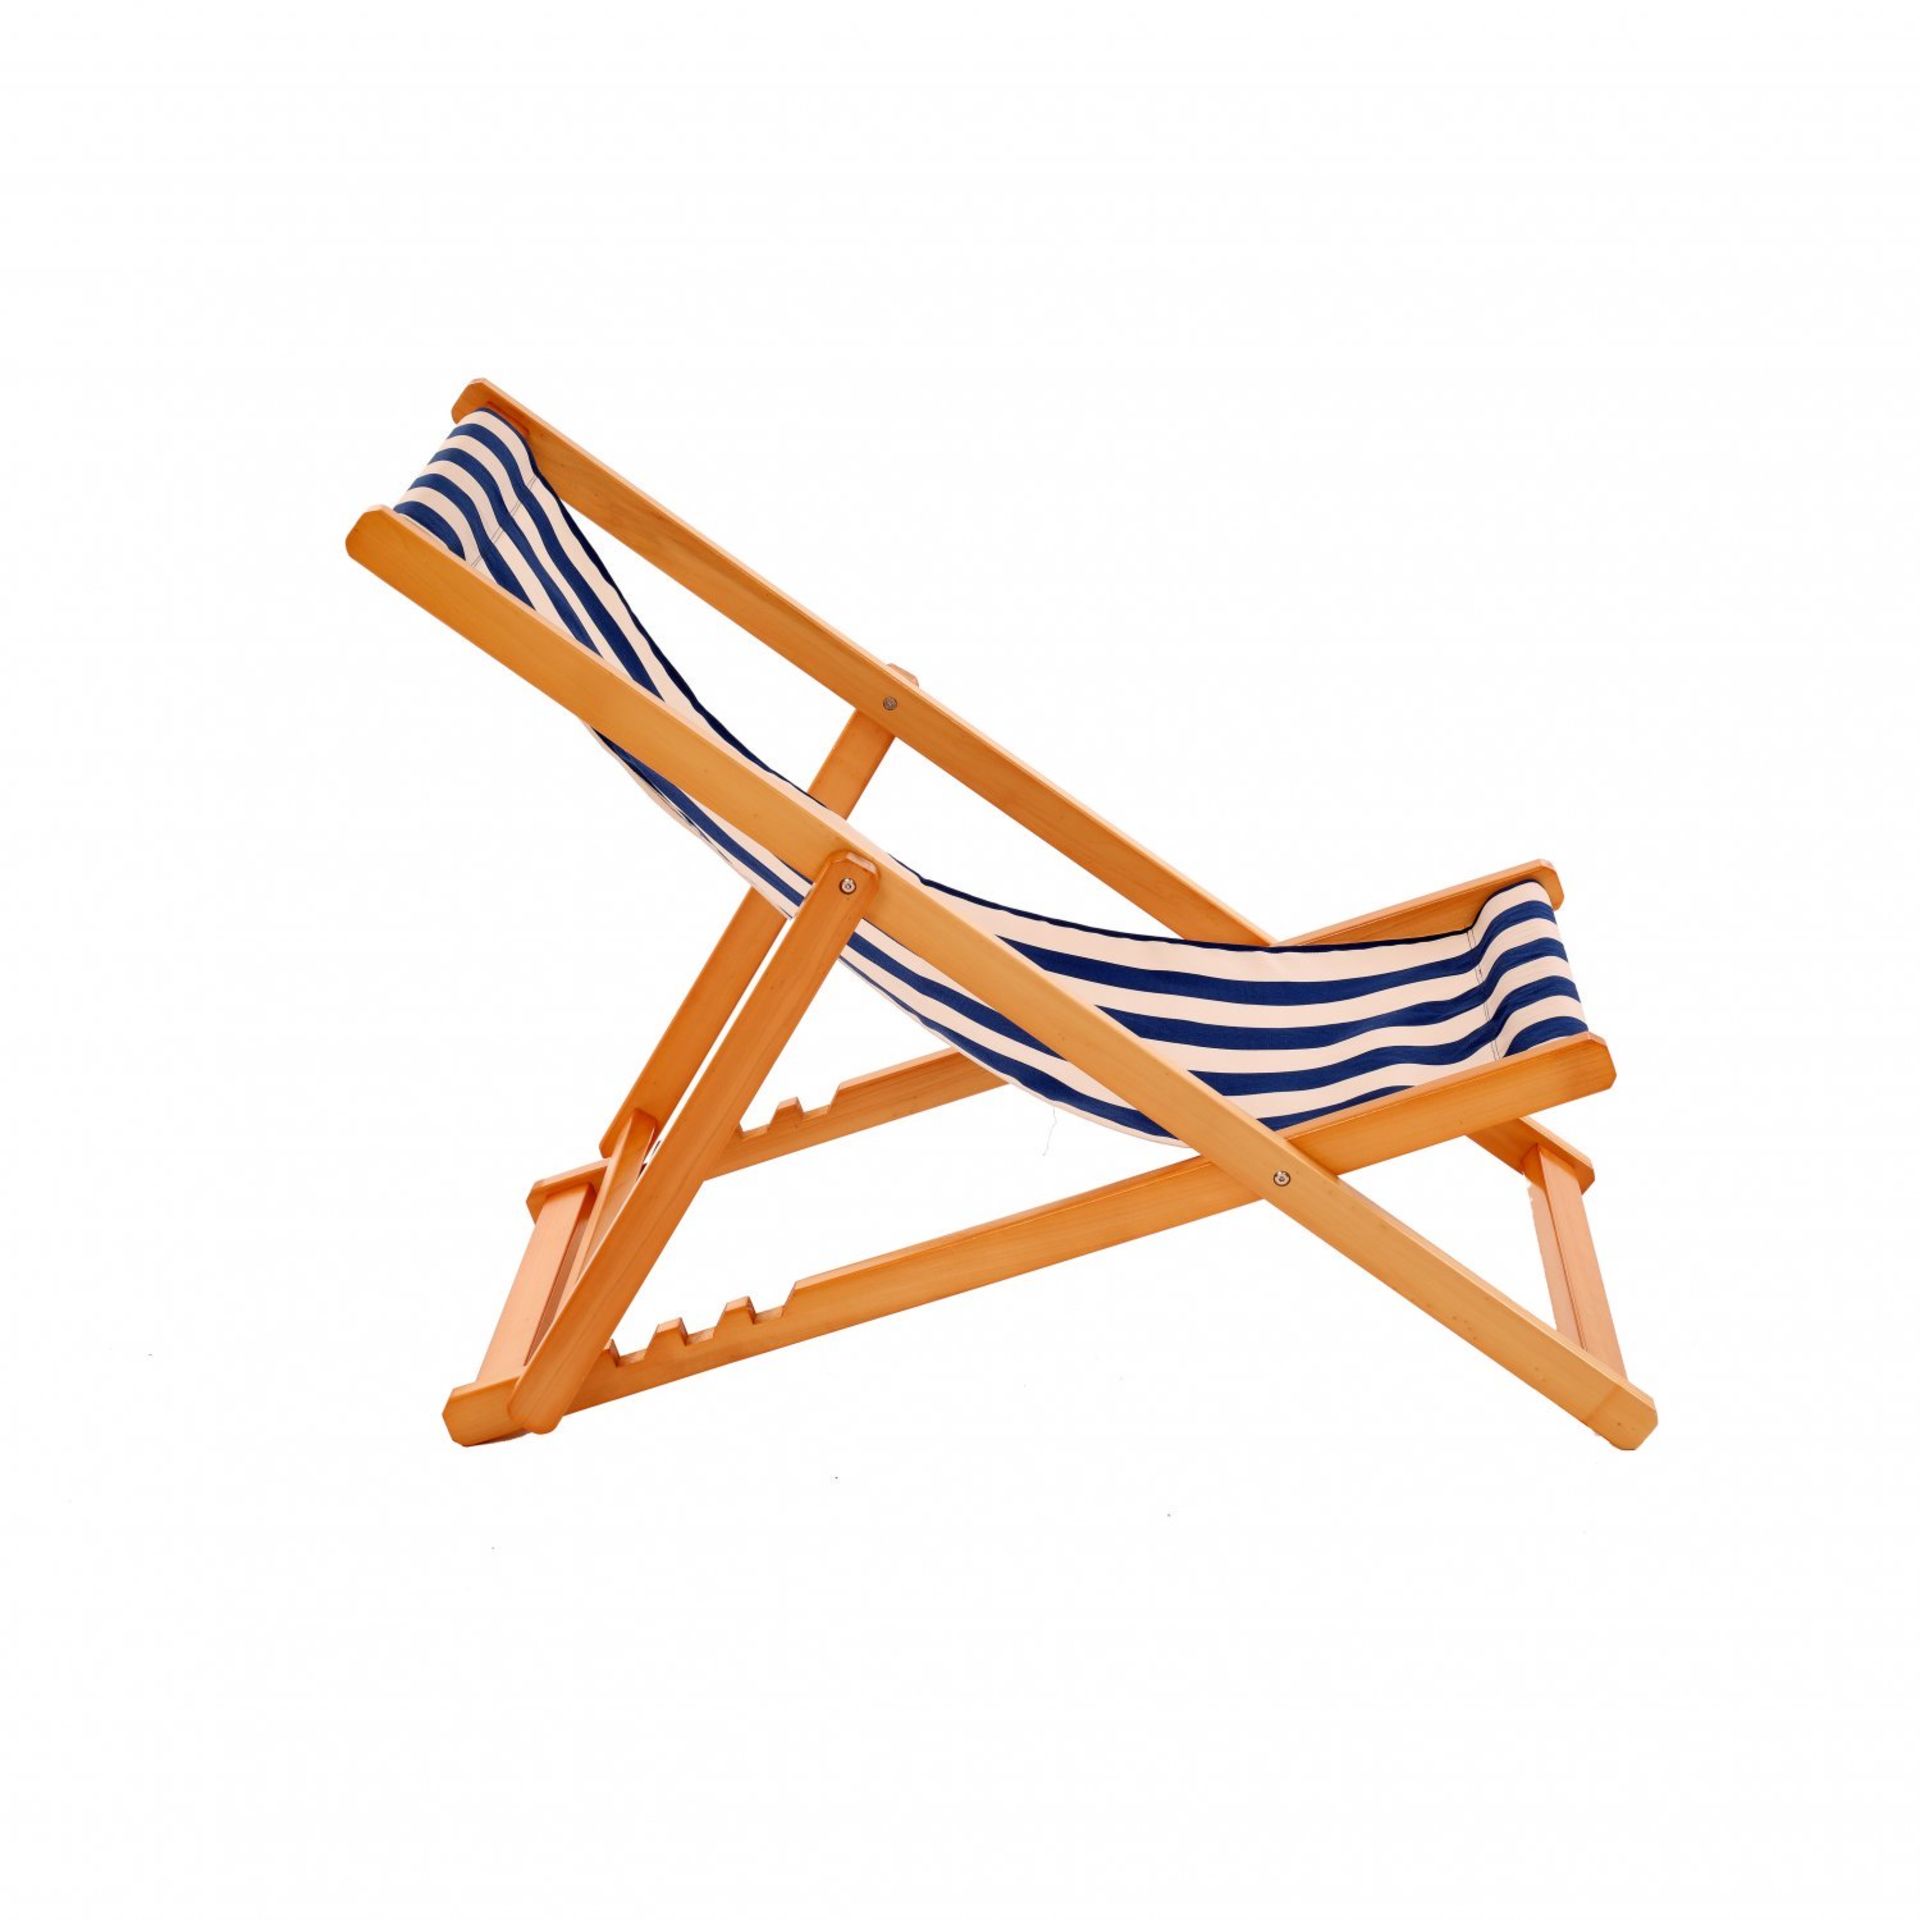 (RU87) Folding Hardwood Garden or Beach Deck Chairs Deckchairs Relax this summer wi... - Image 2 of 2